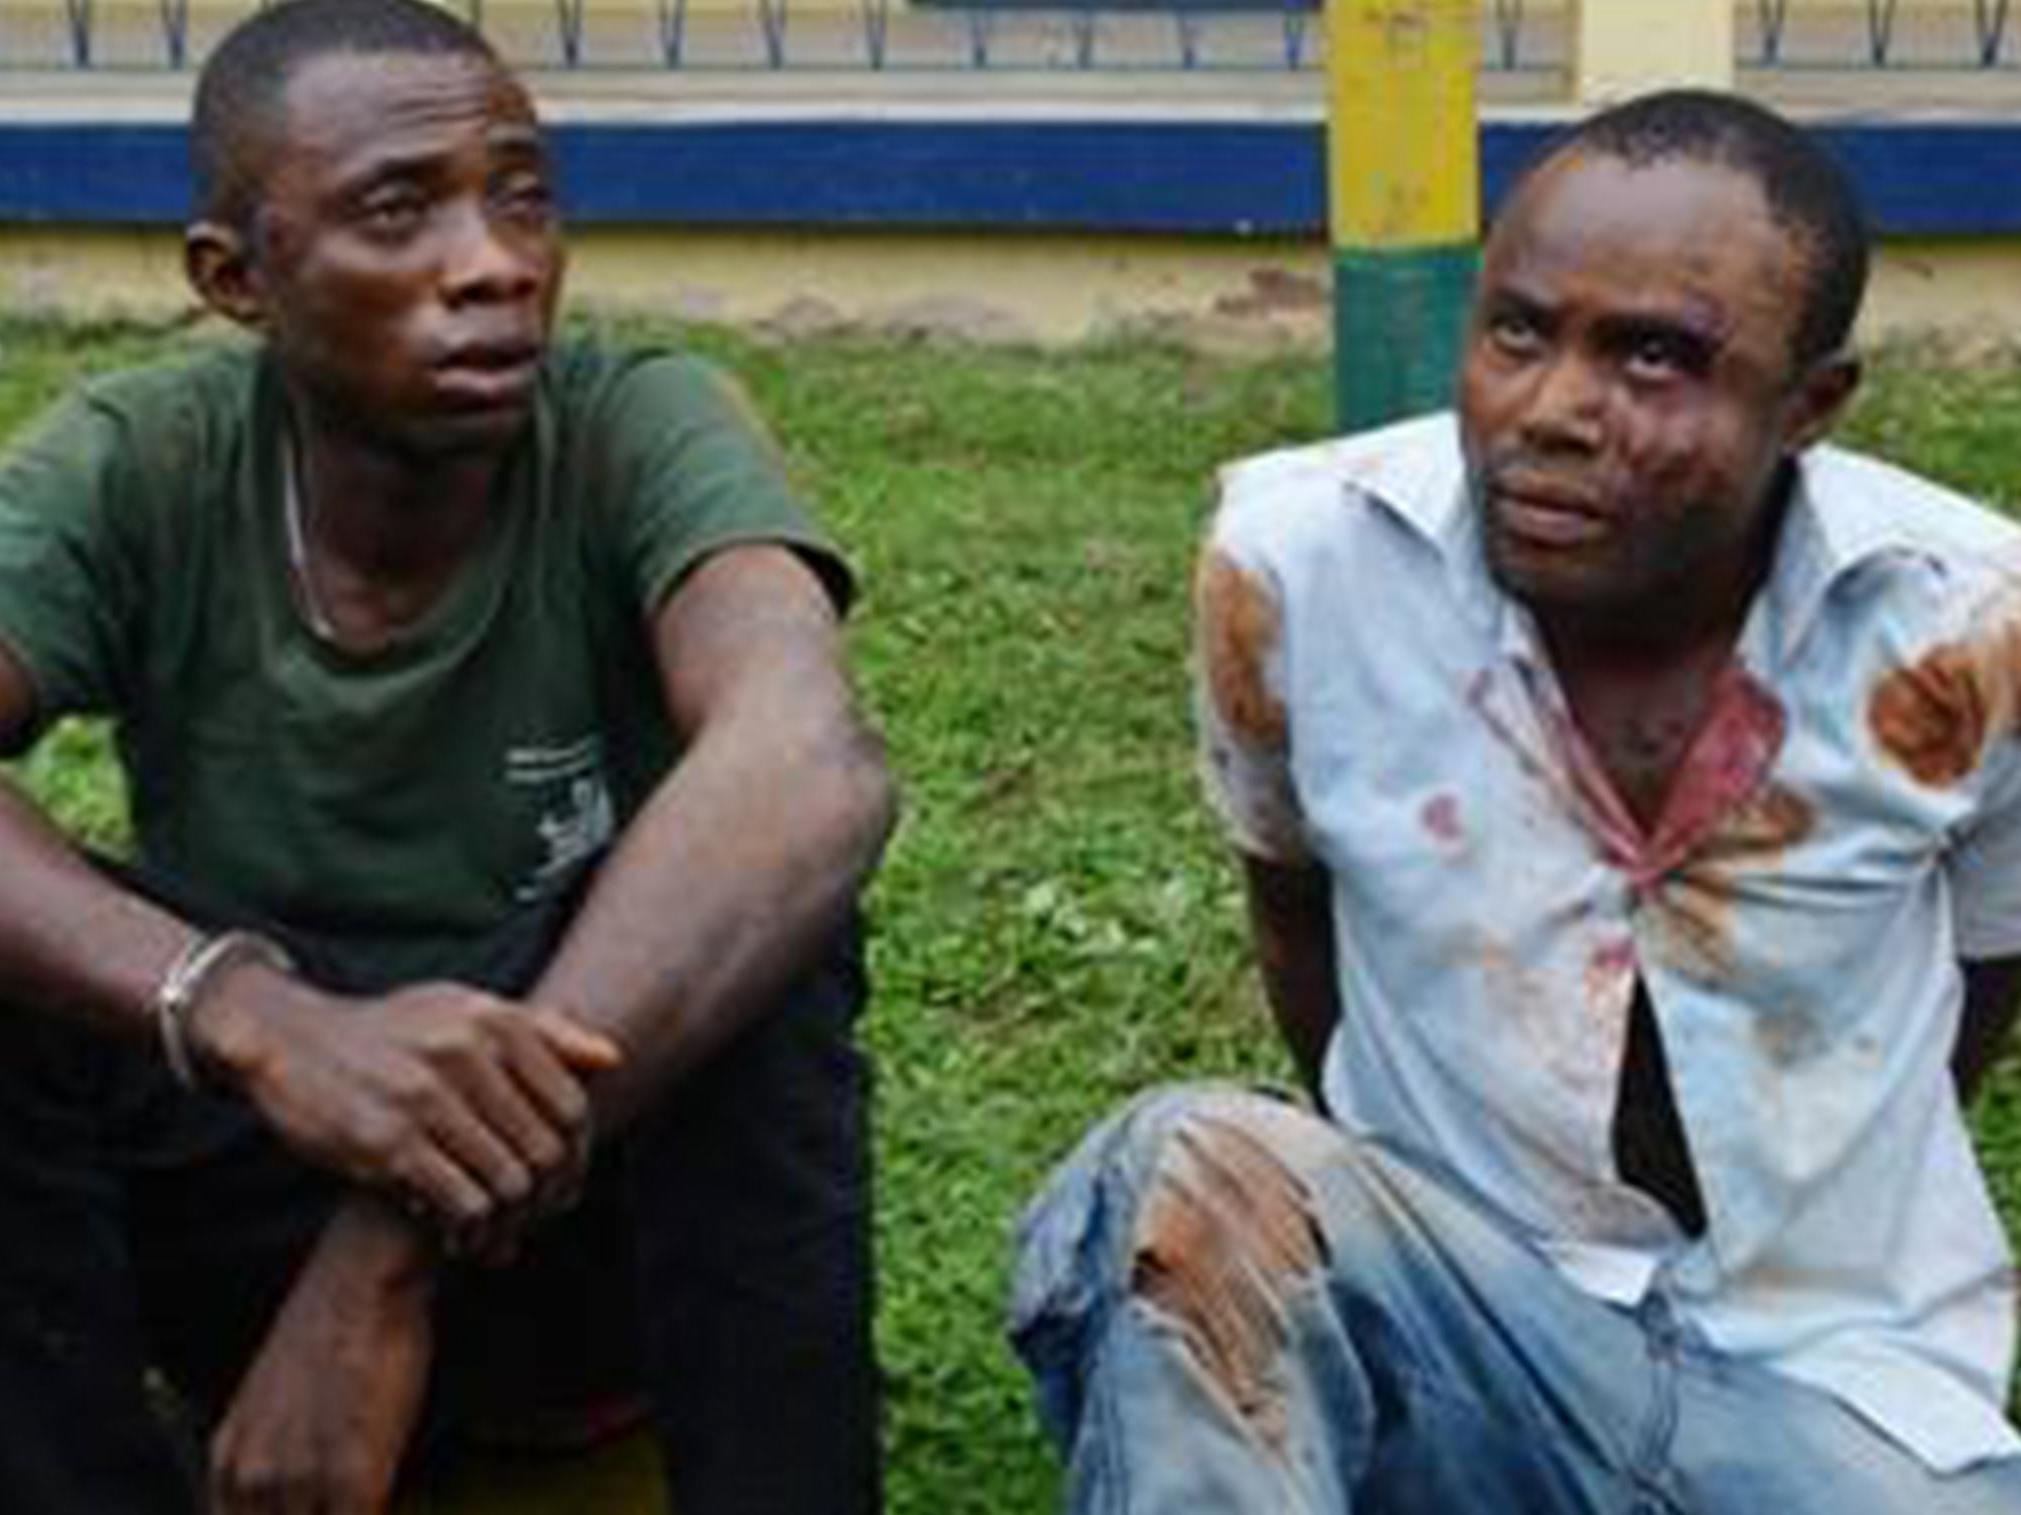 Suspects Chukwudi Chukwu and Ibeh Bethel Lazarus were paraded before the media by police